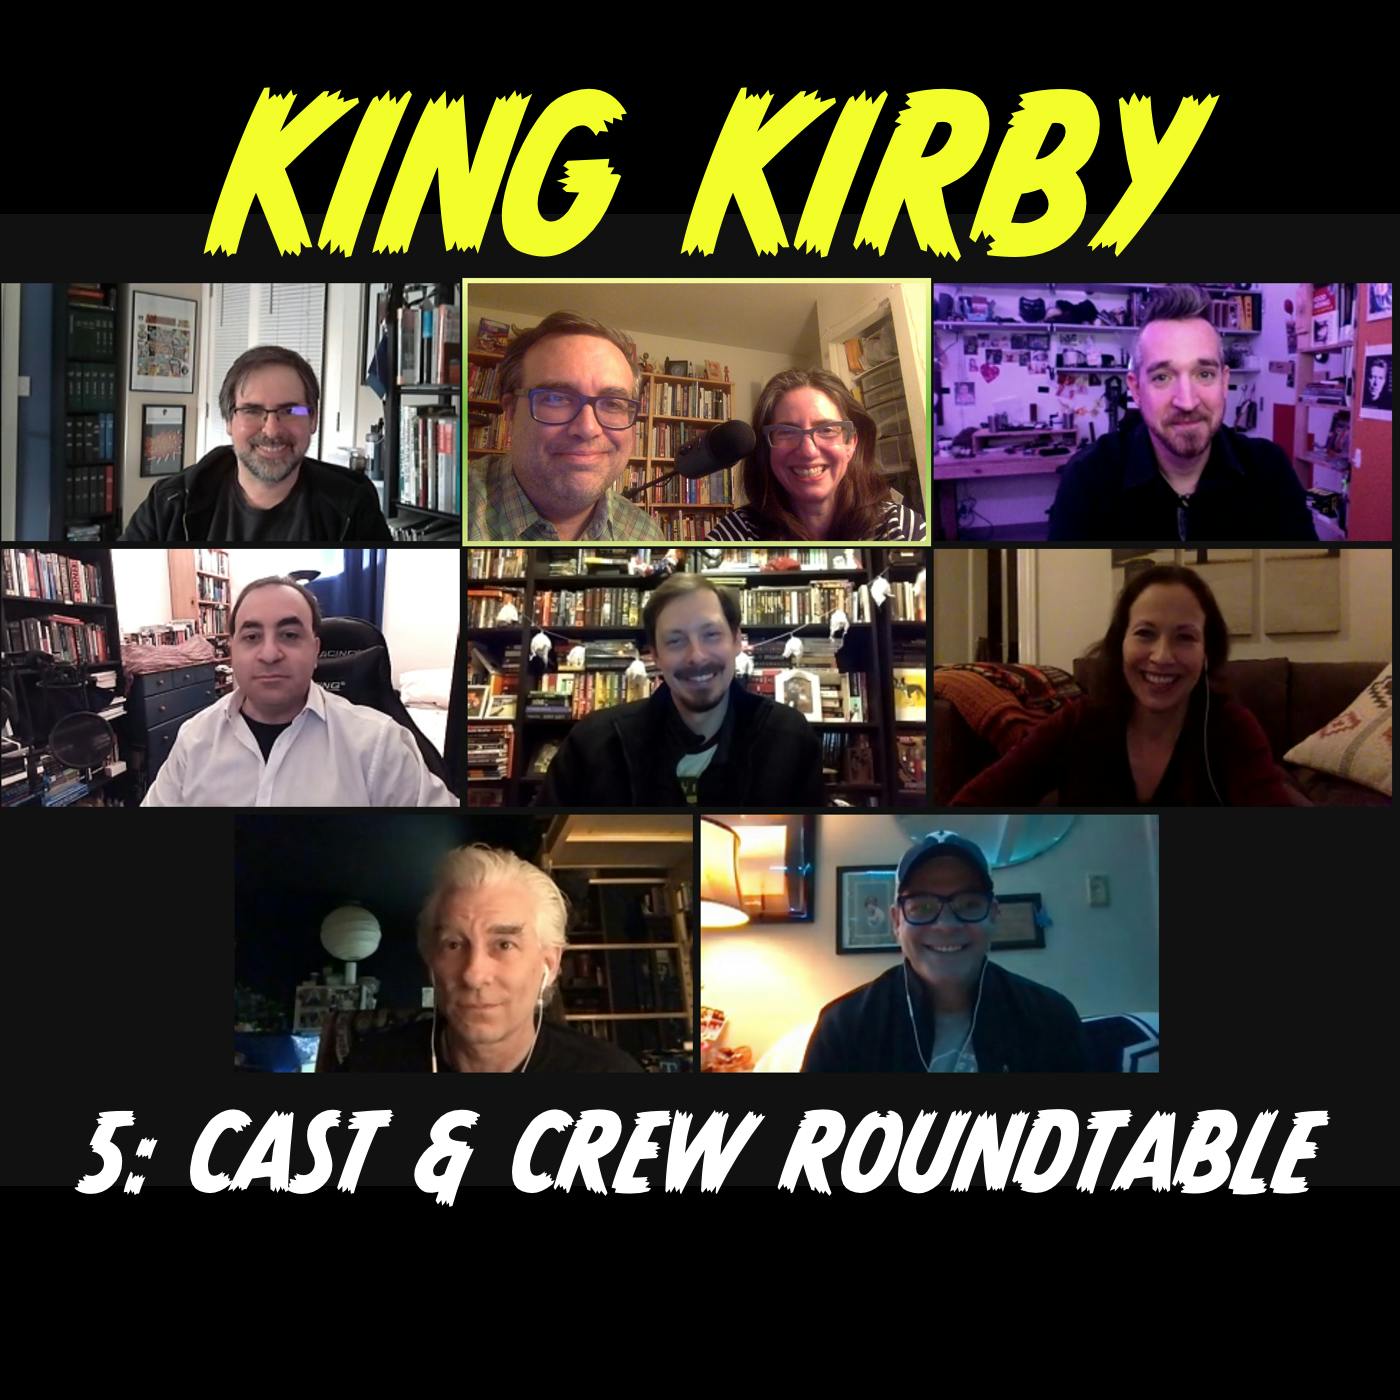 Cast and Crew Roundtable